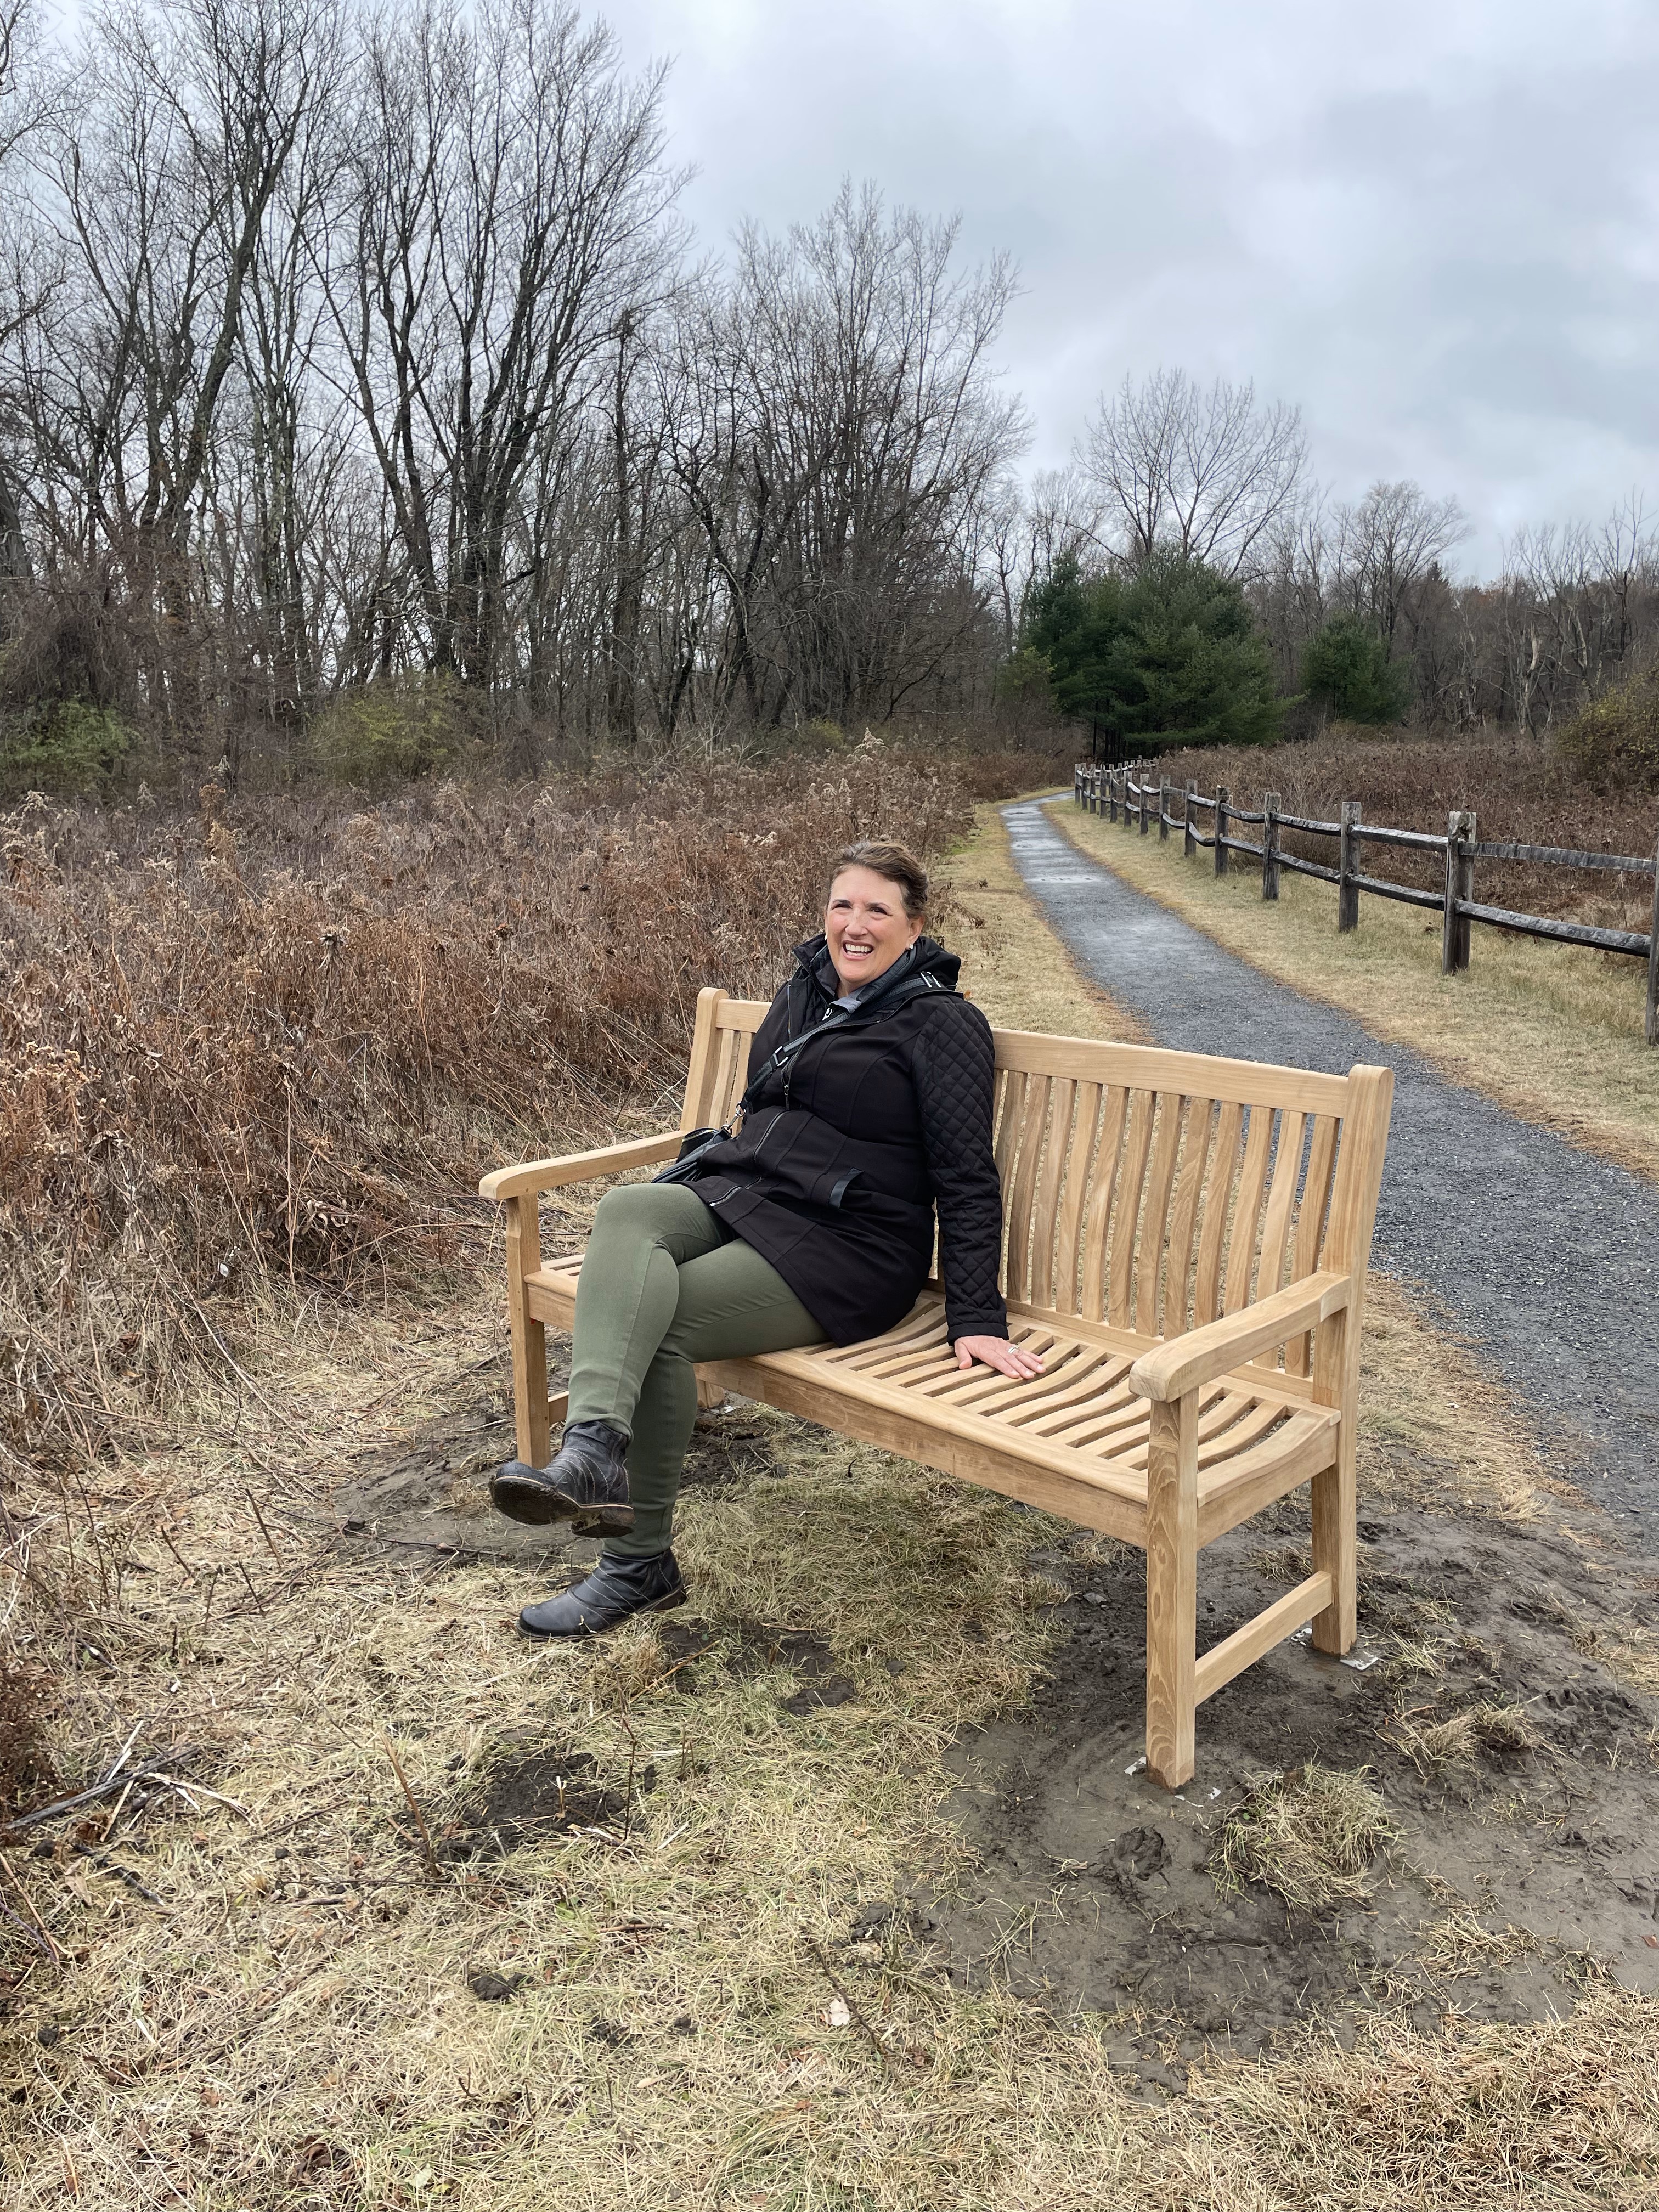 New benches are installed by GBLC on trails throughout Great Barrington. 